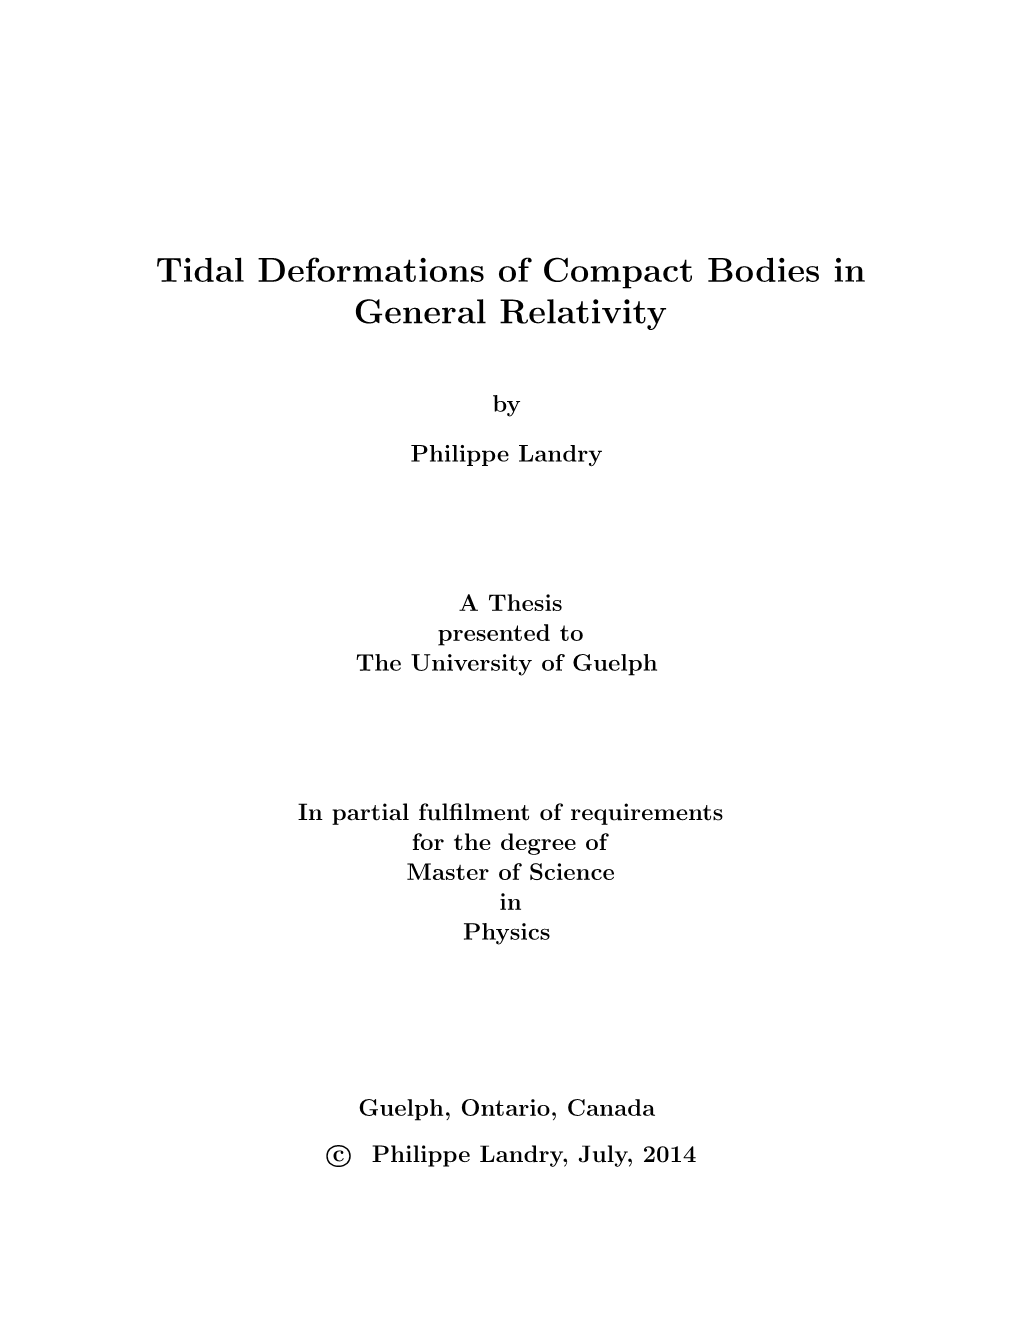 Tidal Deformations of Compact Bodies in General Relativity